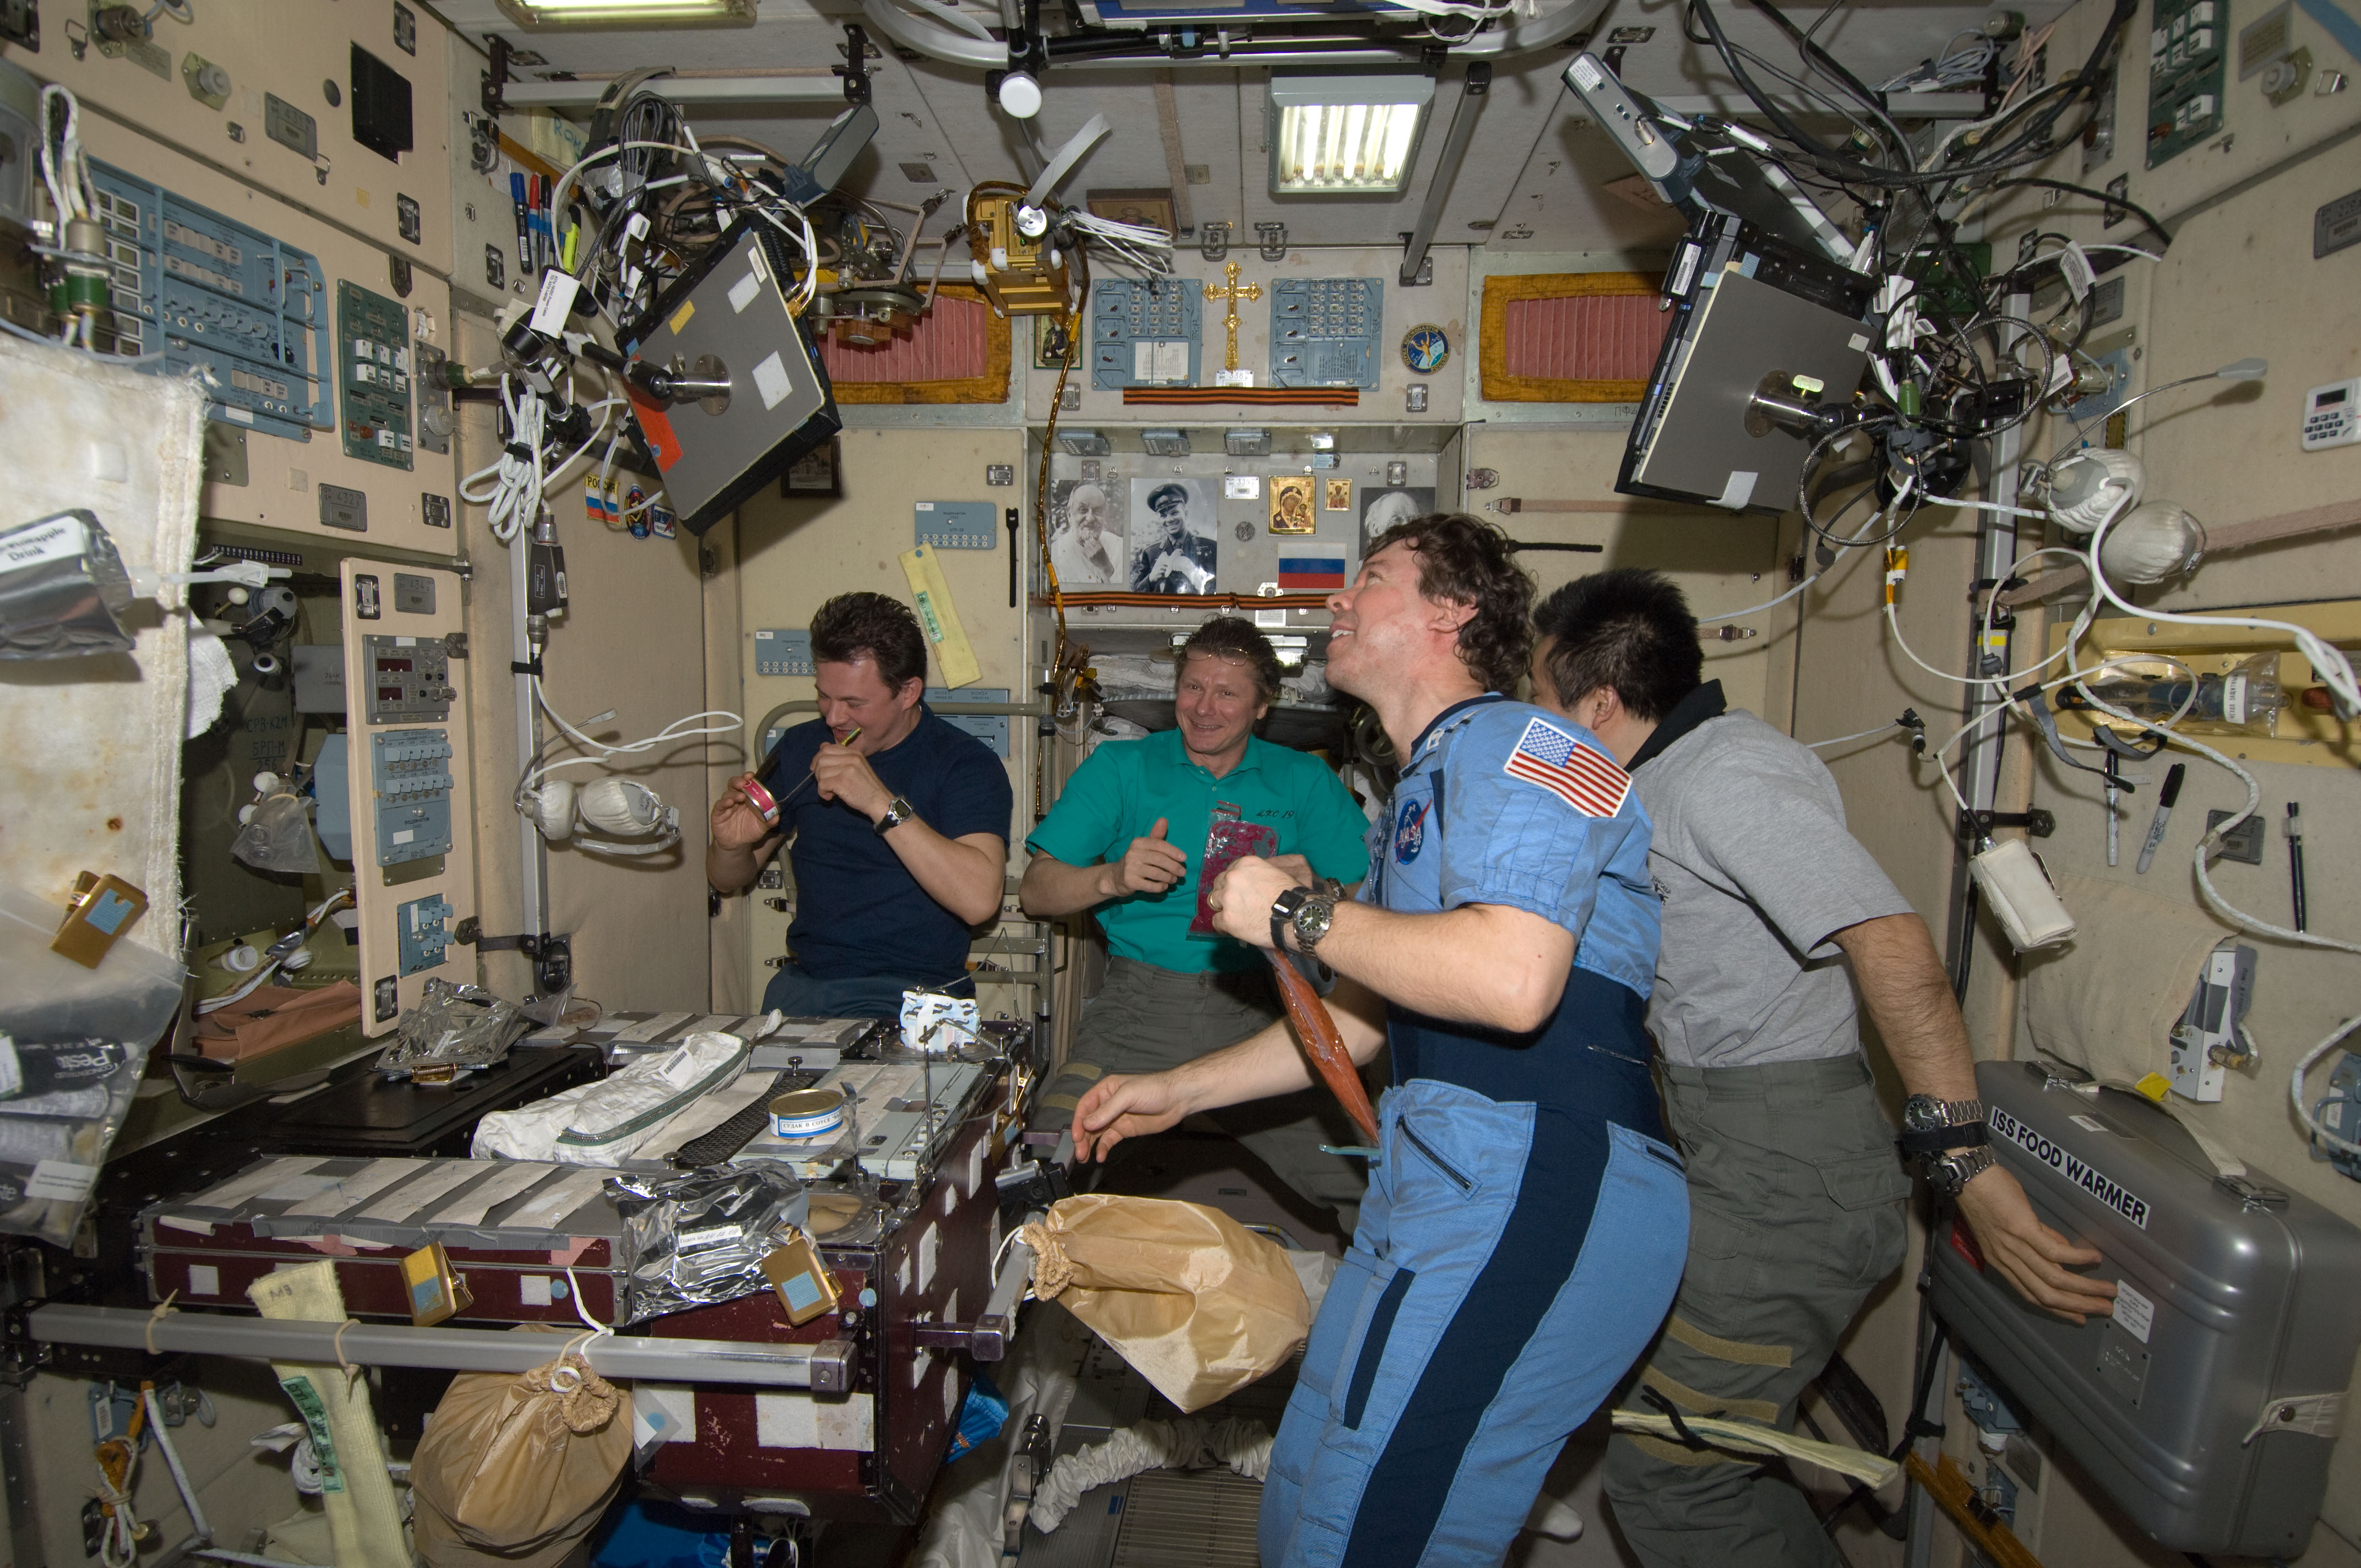 ISS-20 Crew members share a meal at the galley in the Zvezda Service Module